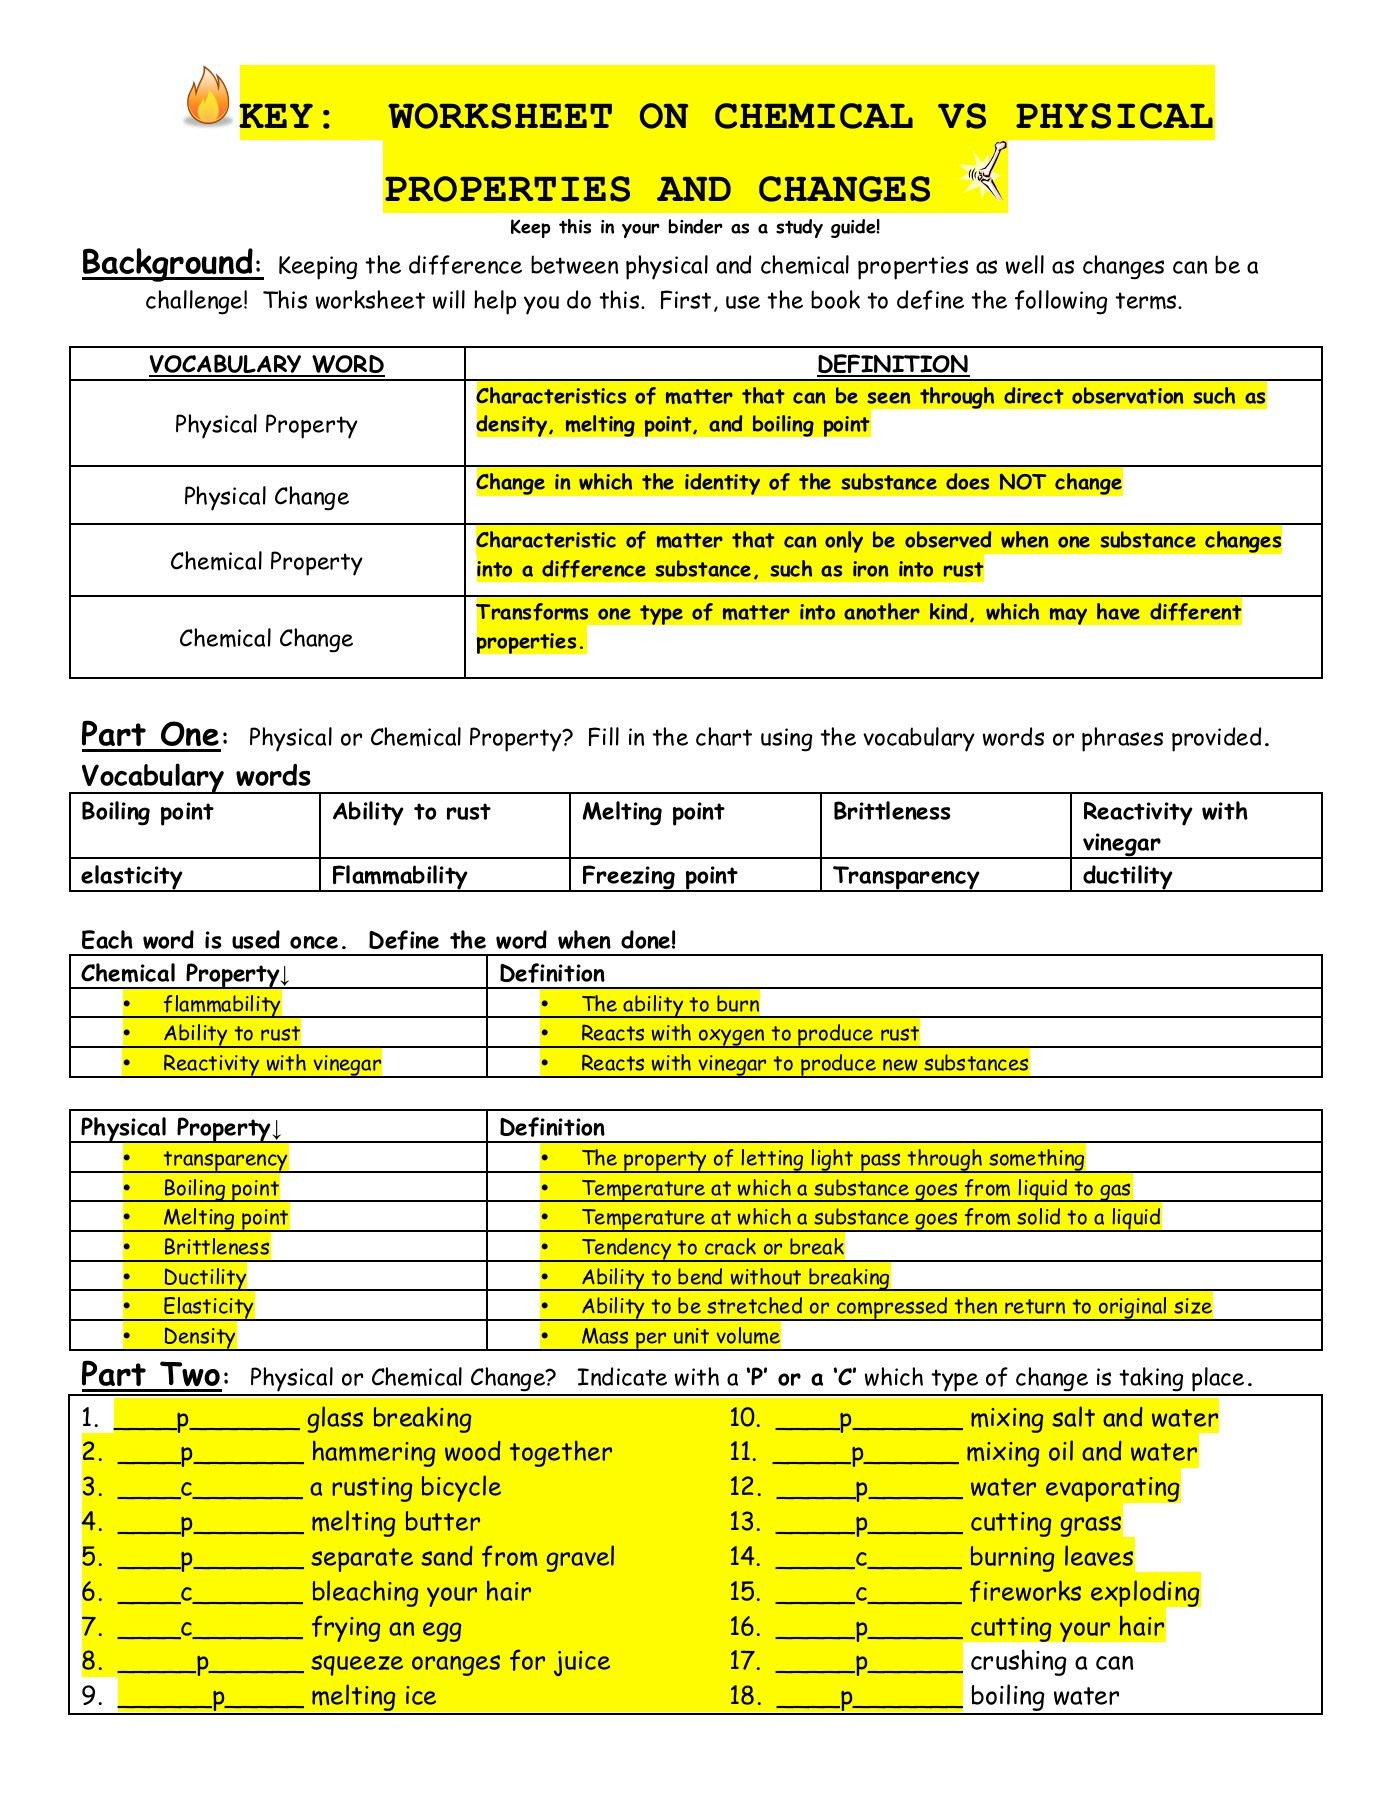 physical-and-chemical-changes-and-properties-of-matter-worksheet-db-excel